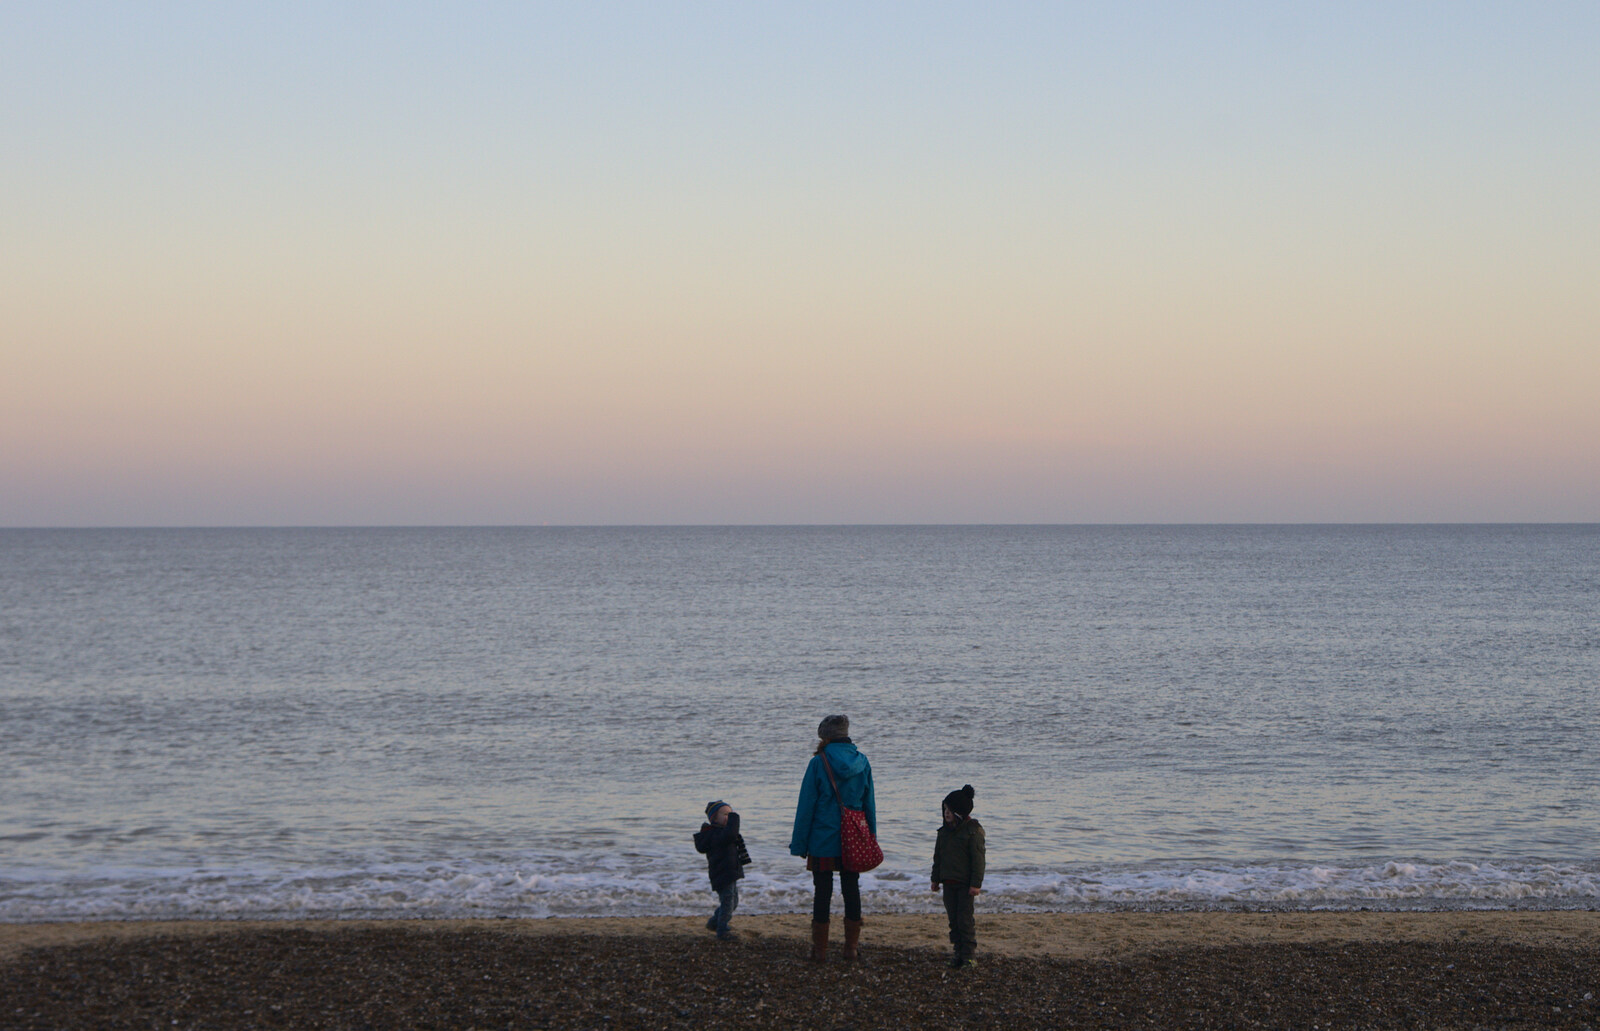 The gang stand by the sea's edge from Sunset on the Beach, Southwold, Suffolk - 30th December 2014